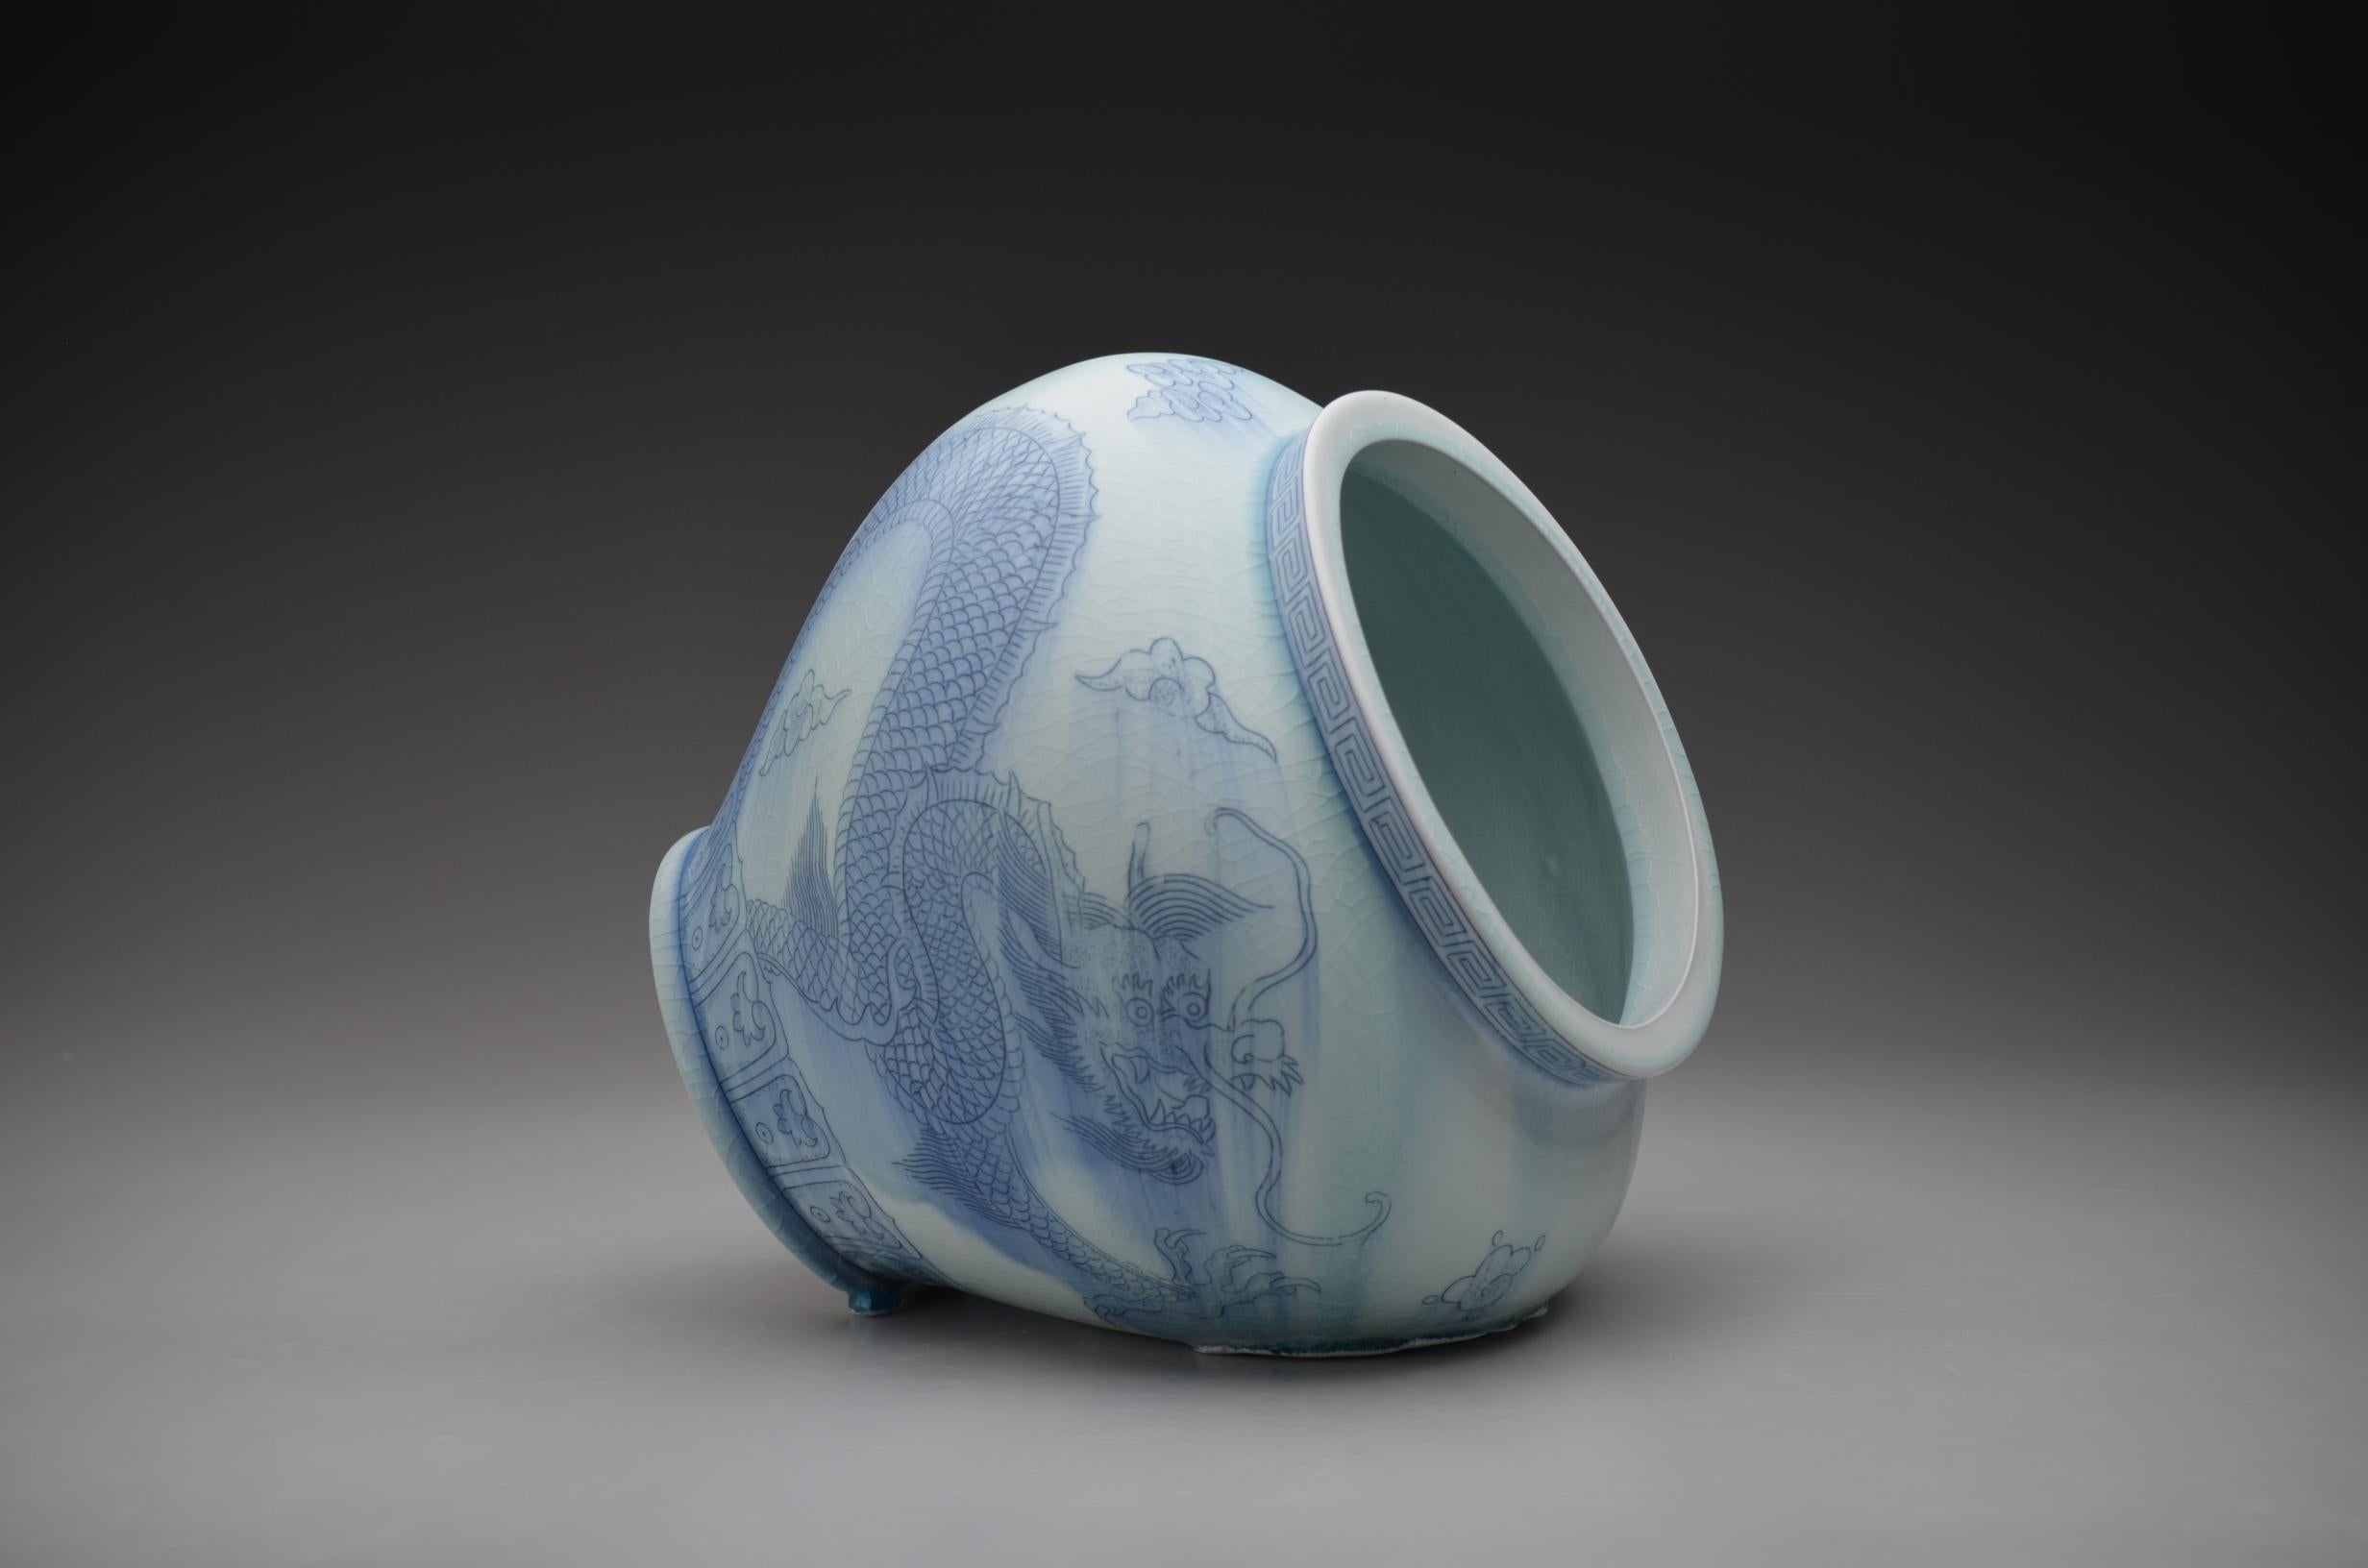 Steven Young Lee Abstract Sculpture - "Jar with Double Dragons", Contemporary, Ceramic, Sculpture, Porcelain, Cobalt